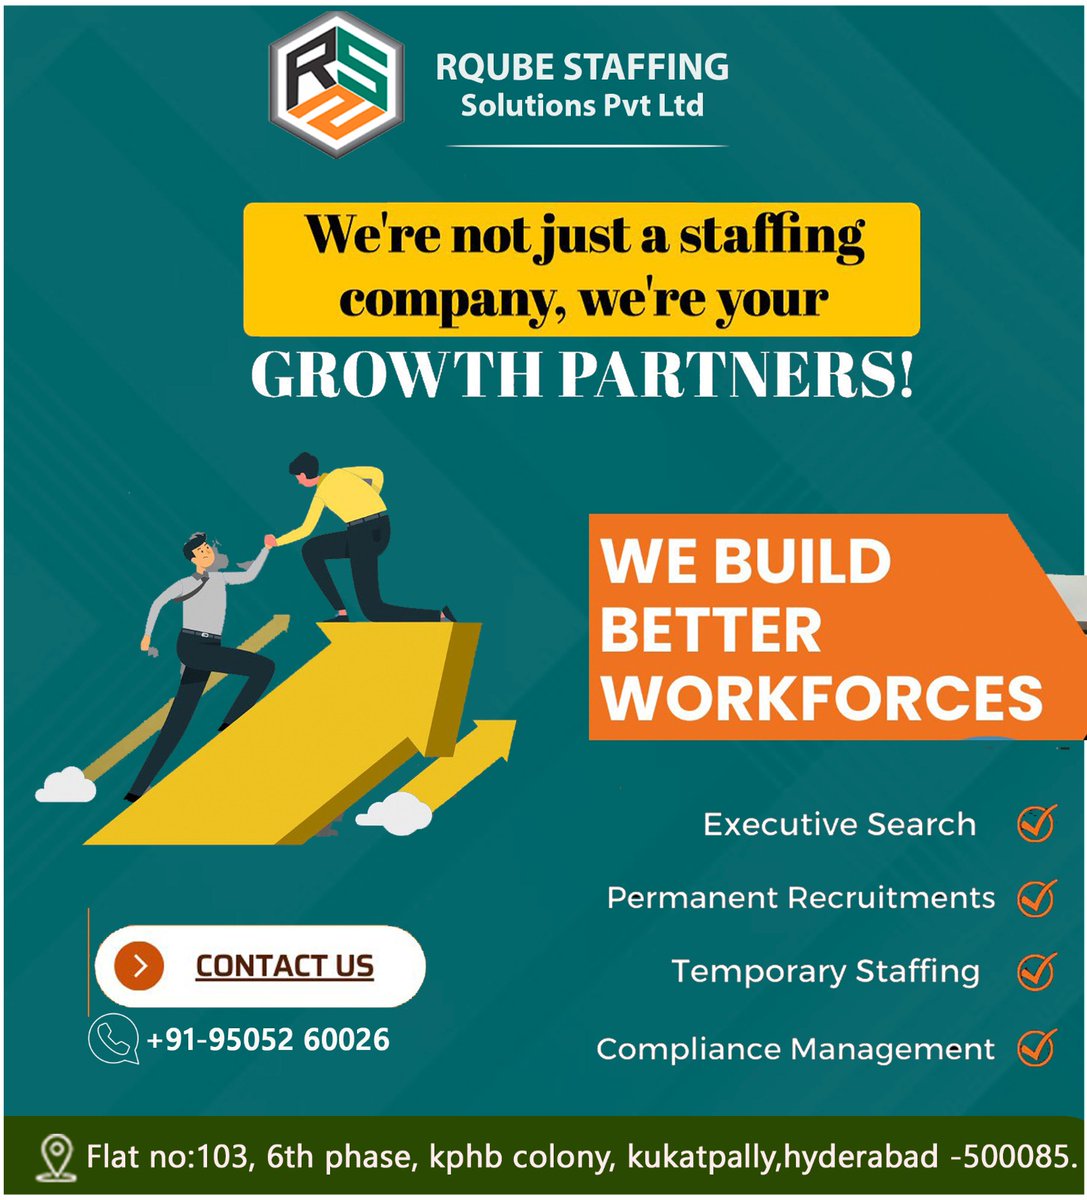 We build better Work forces 
contact :+91 95052 60026
#staffingsolutions #beststaffingagency 
#staffingsolutions #workagency #canada #hotel #workers #skilledworkers #contractstaffing #permenentstaffing
#staffingagency #skilledmanpower  #beststaffingagency